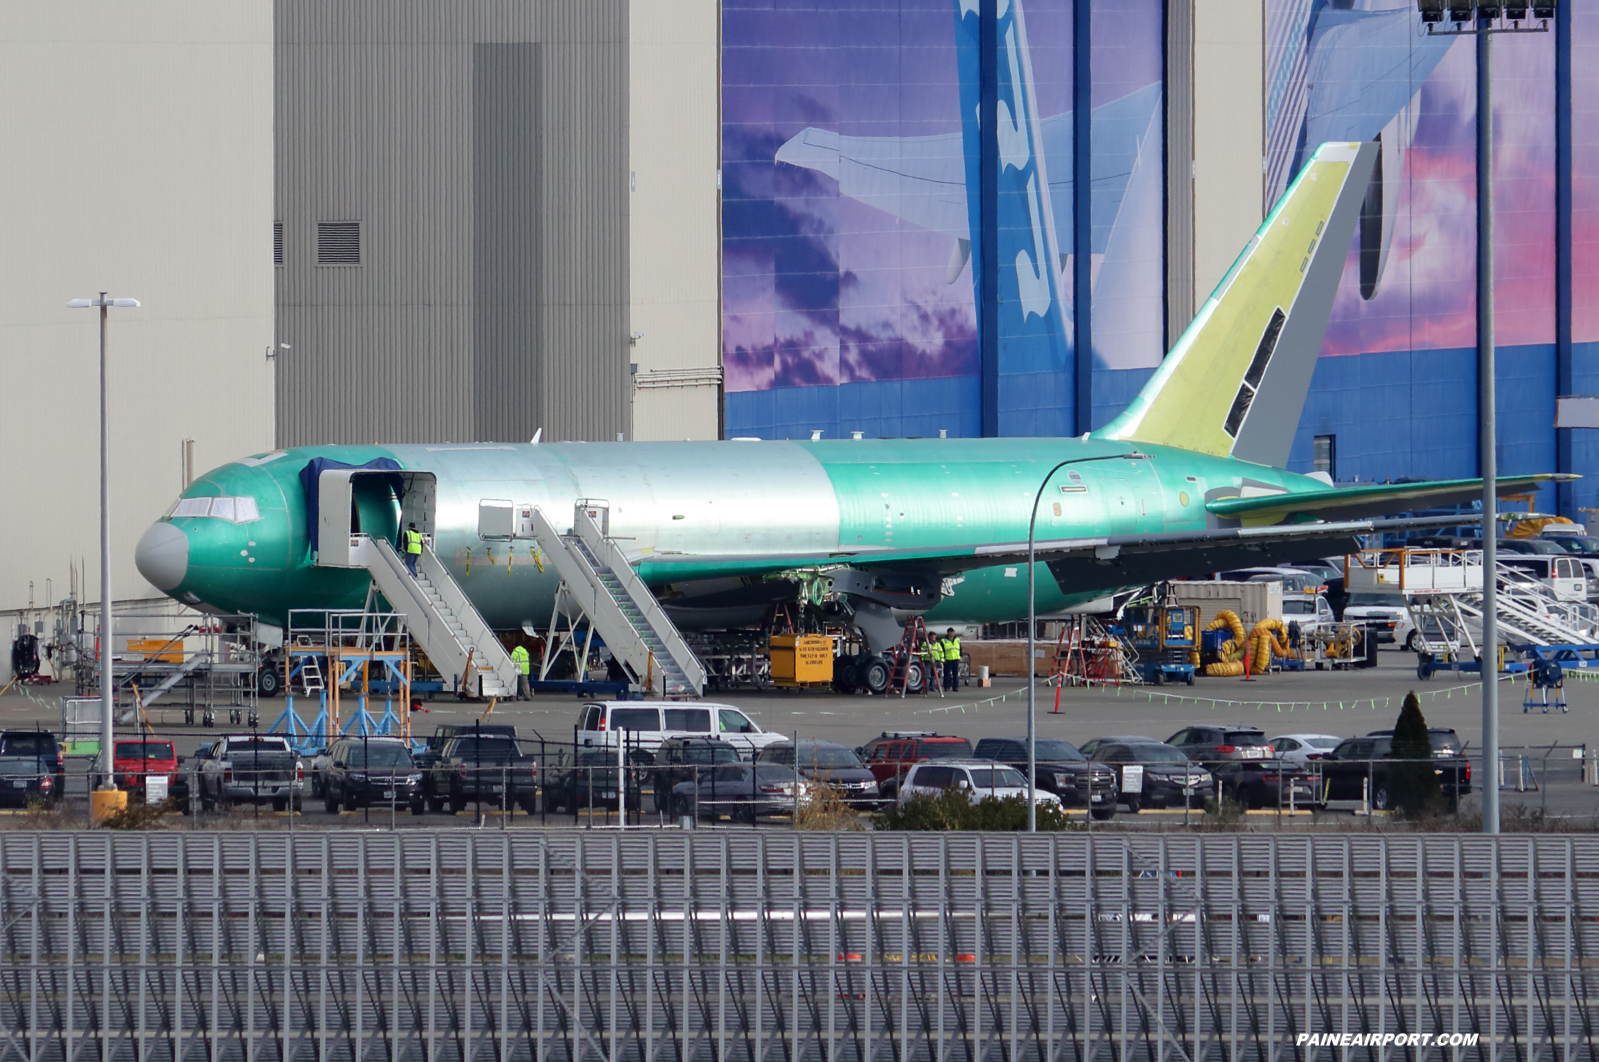 KC-46A line 1202 at Paine Field